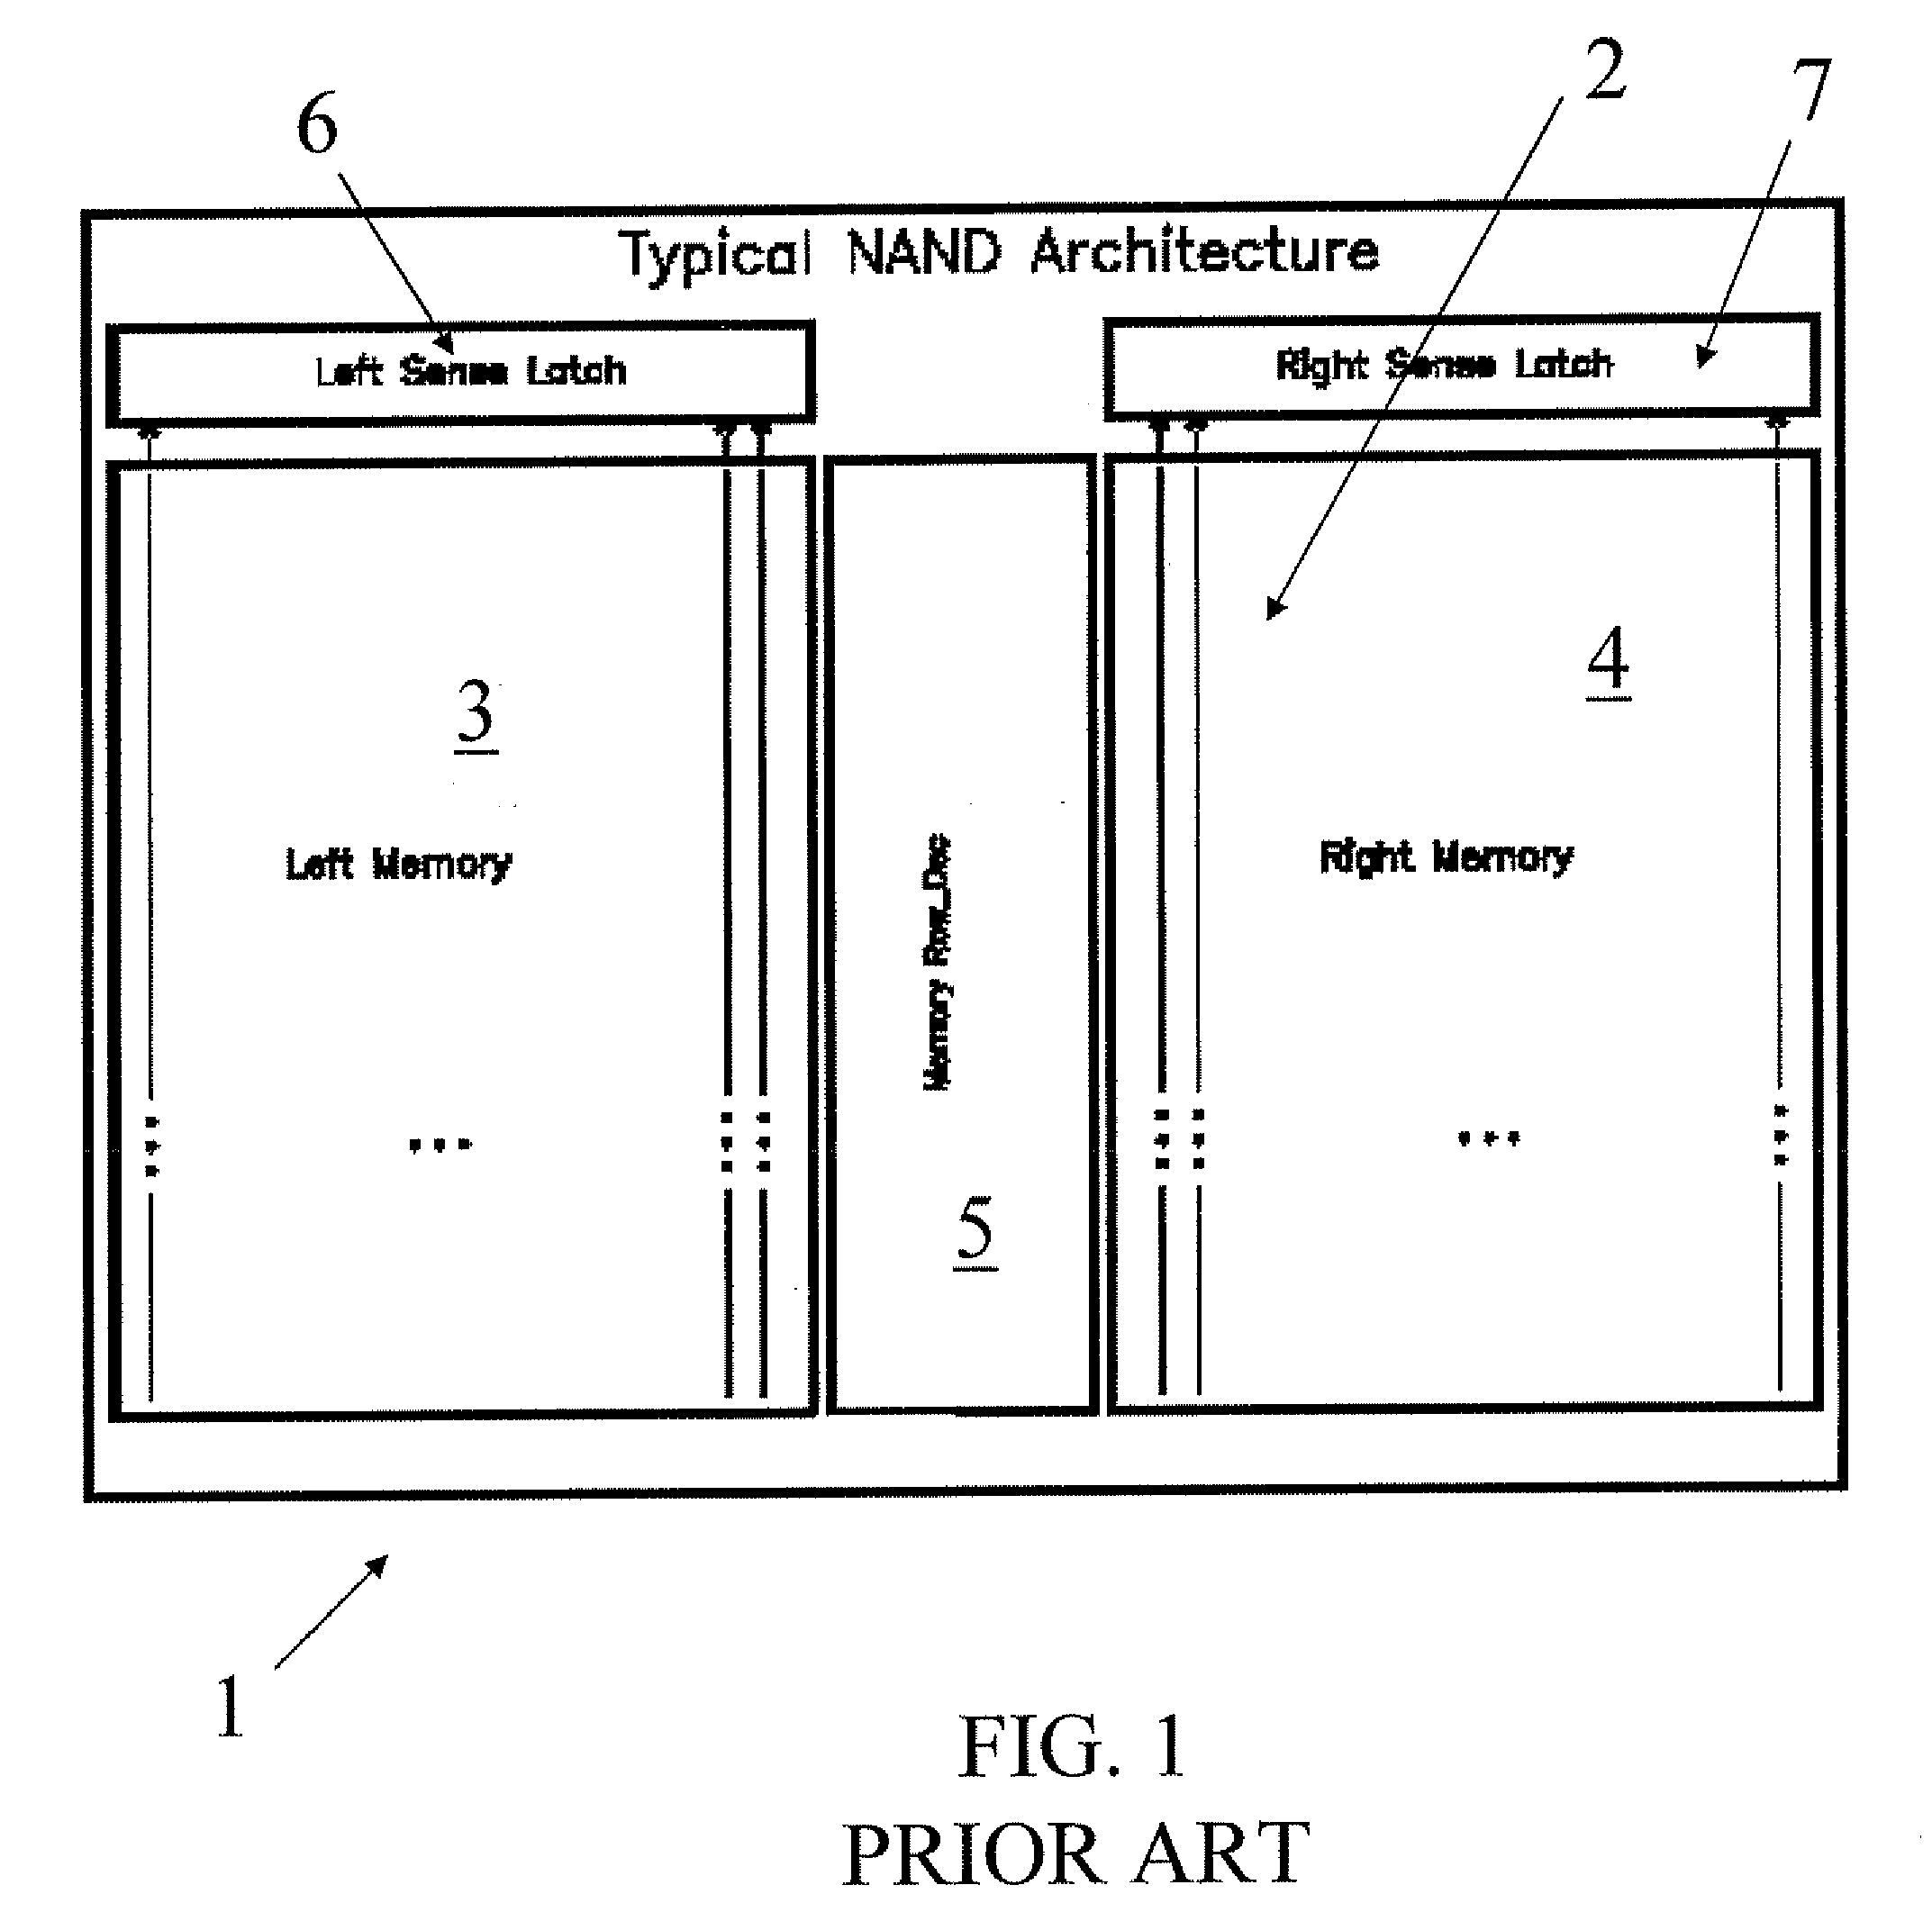 Non-volatile memory electronic device with NAND structure being monolithically integrated on semiconductor